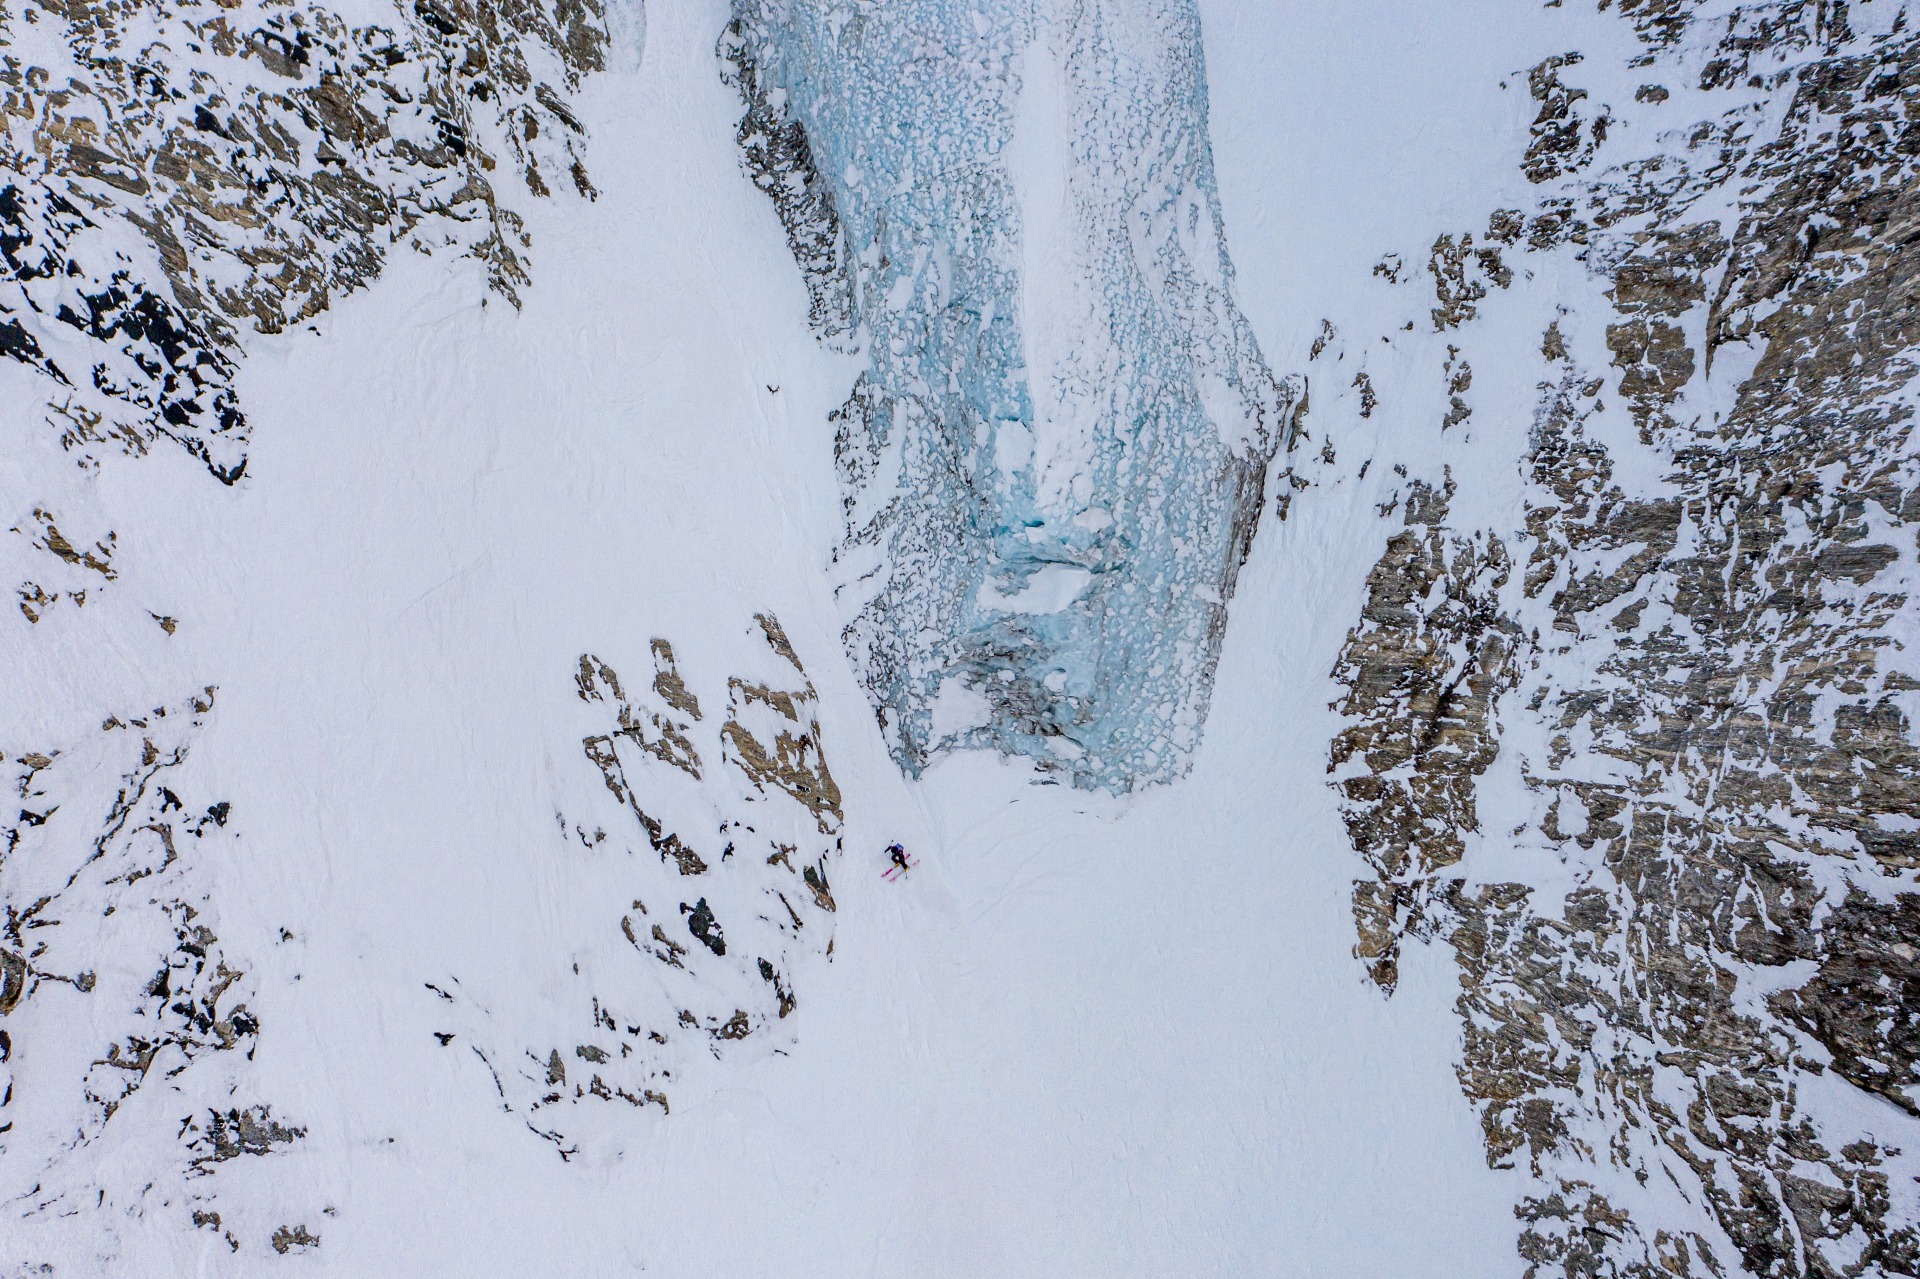 Making technical turns: the Gold Card Couloir. 